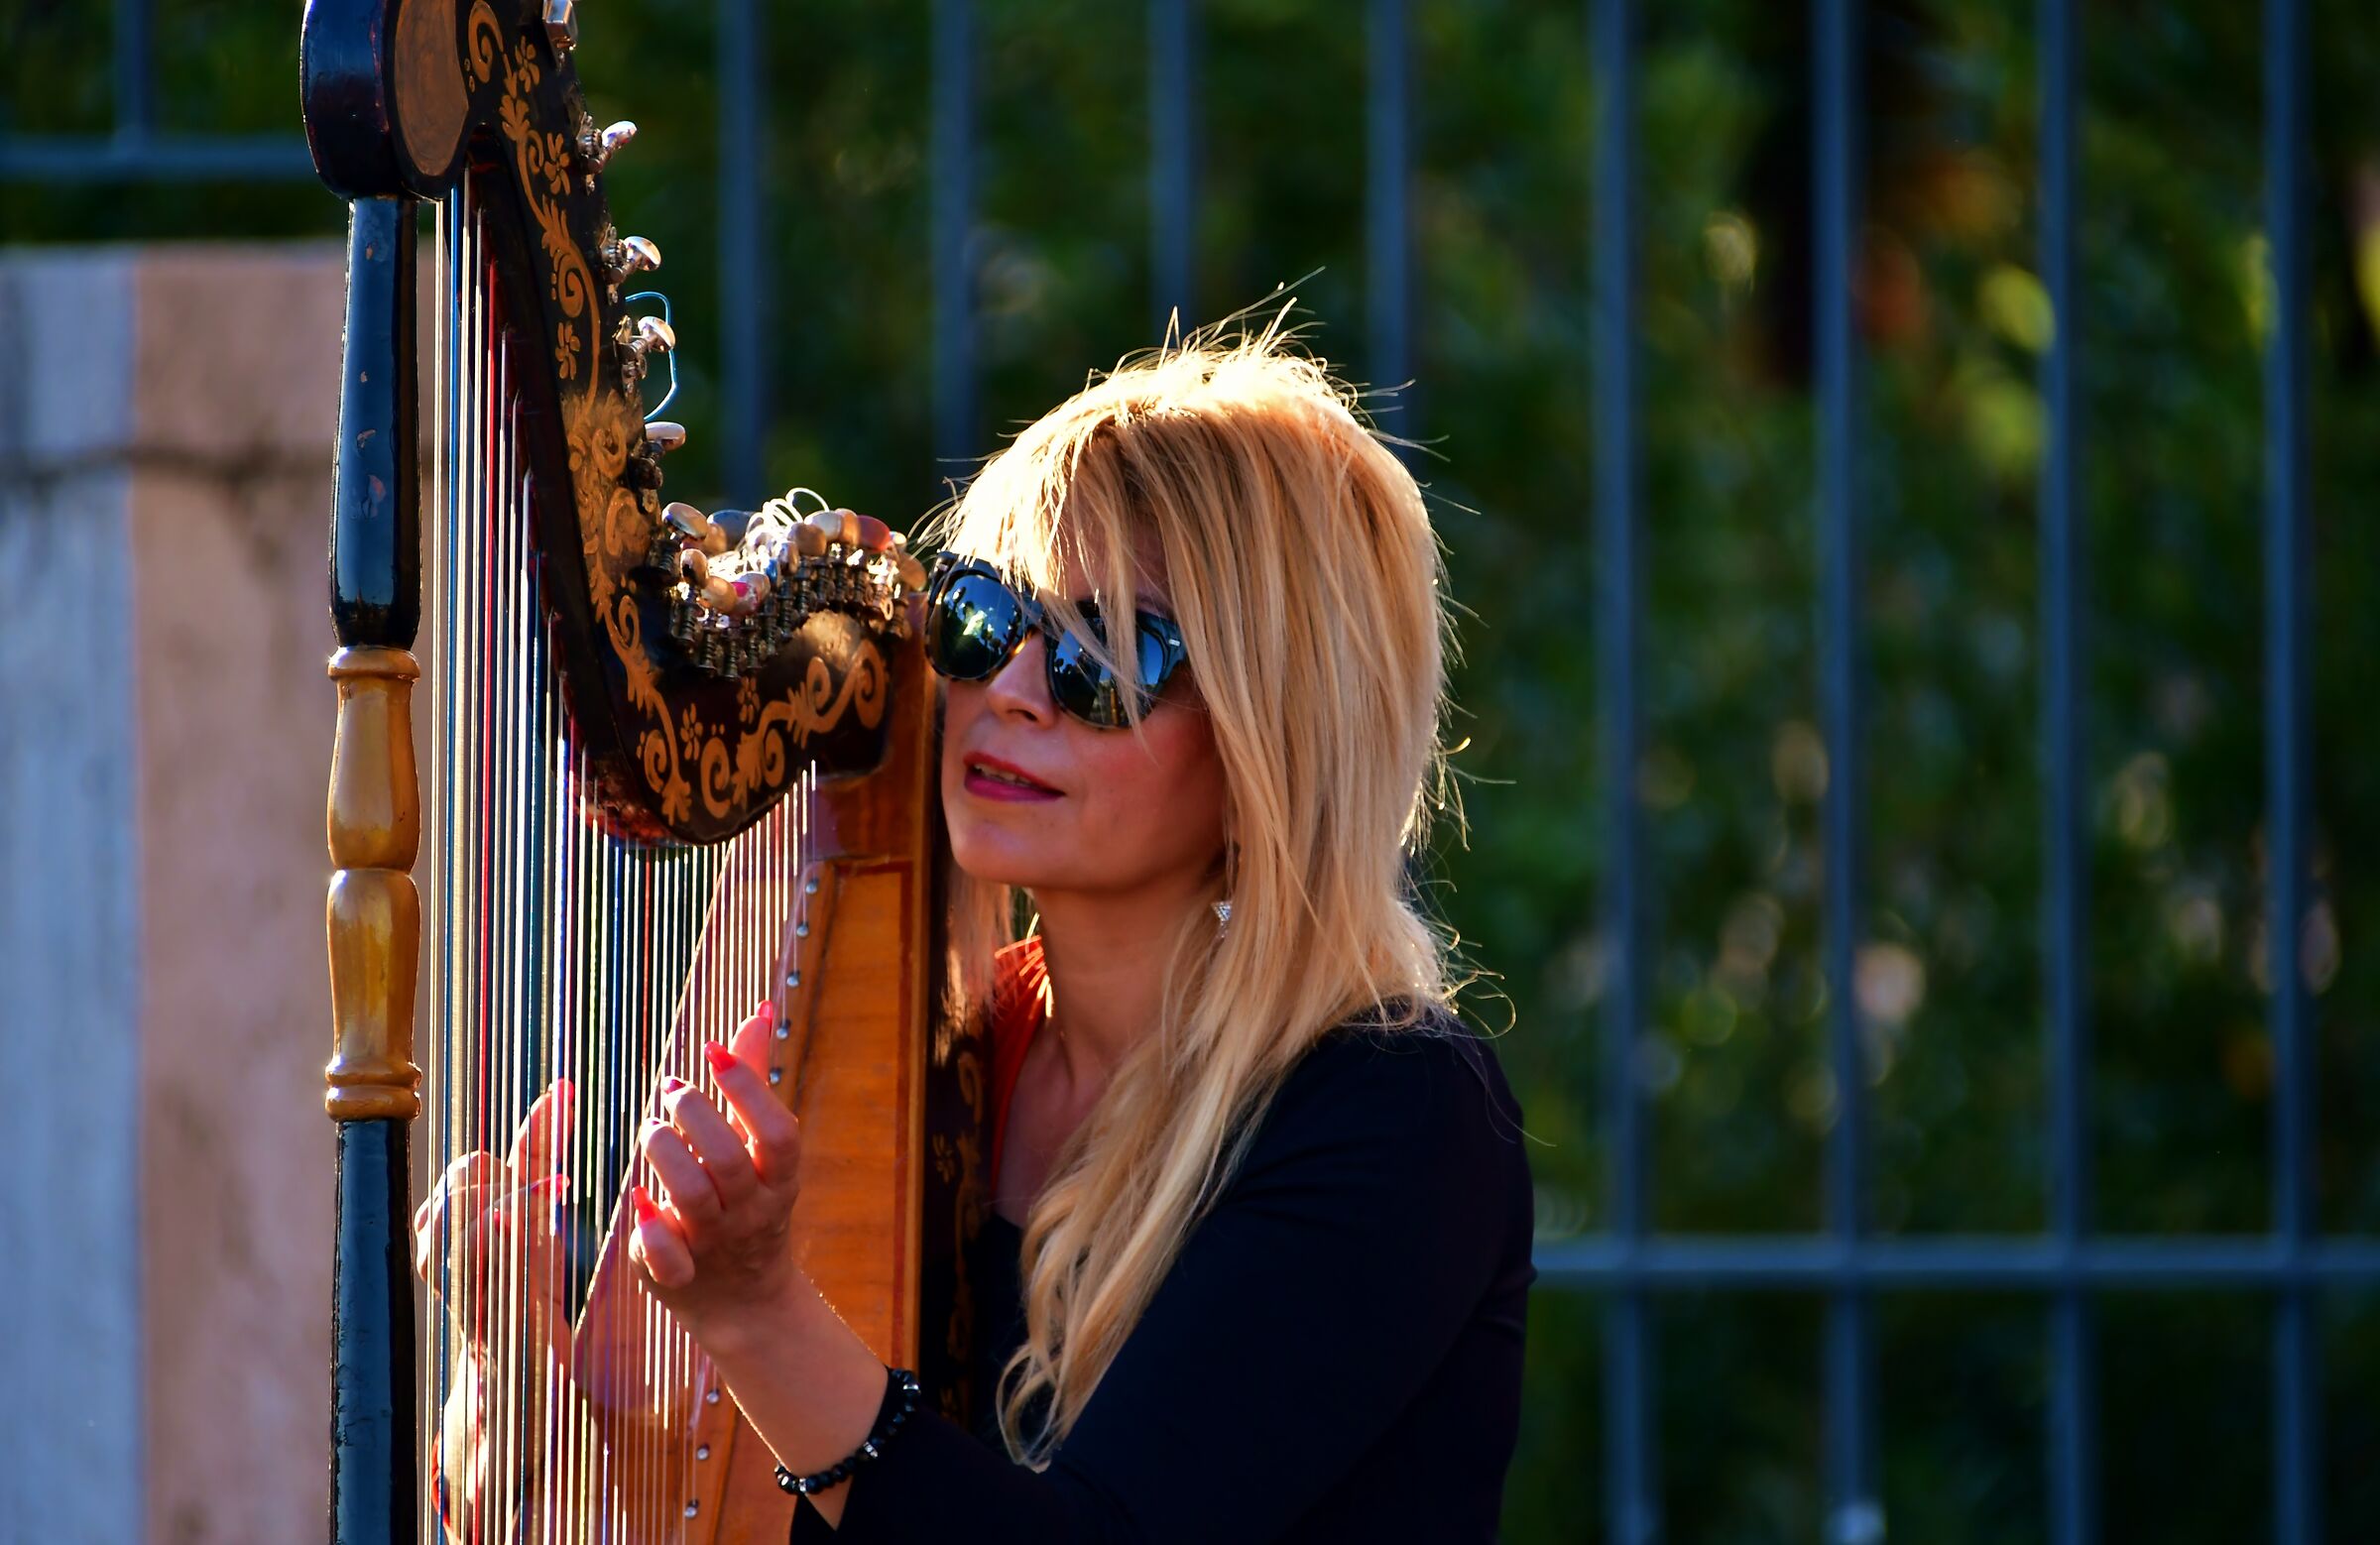 The sweet sound of the Harp...